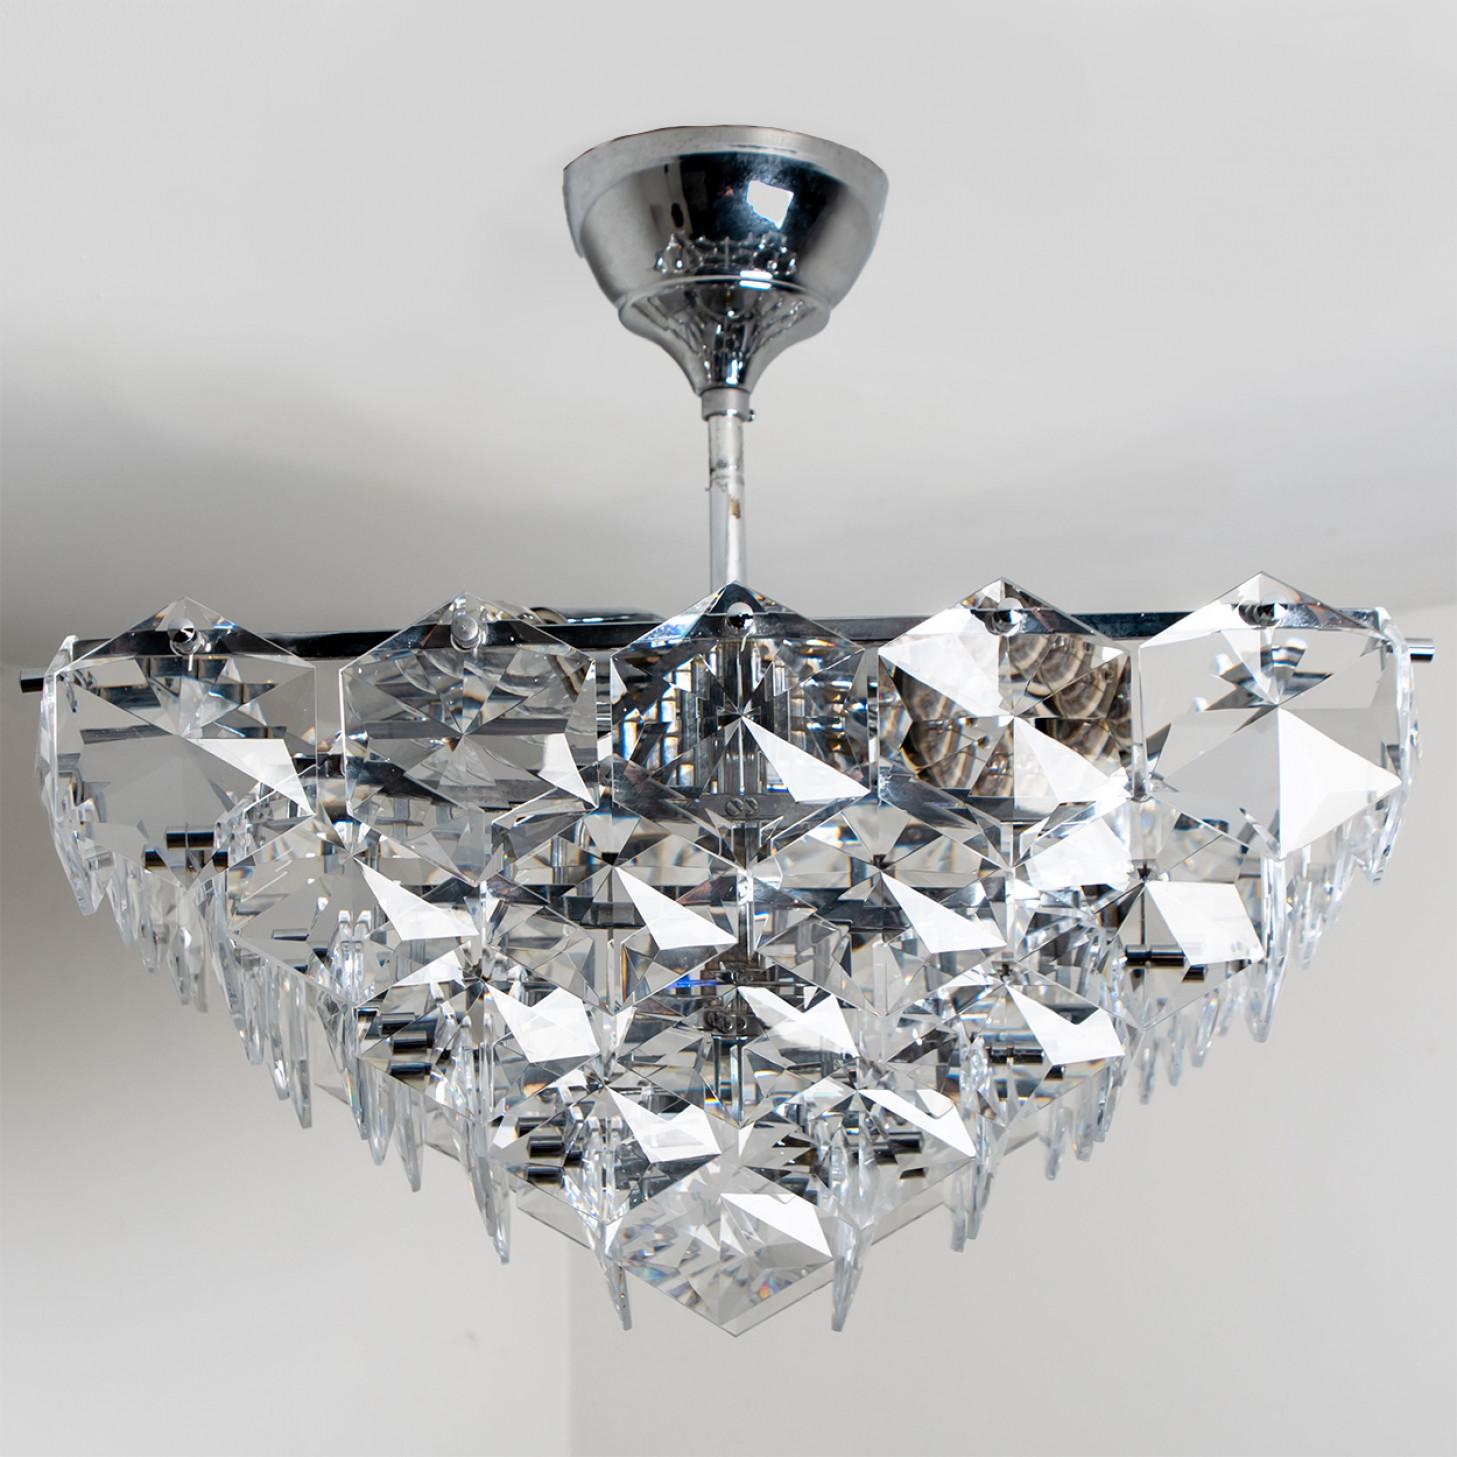 This modernist design chrome chandelier was designed by the Kinkeldey design team during the 1970s and manufactured in Germany. A very elegant Kinkeldey chandelier, it is comfortable with all decor periods. The crystals are meticulously cut in such